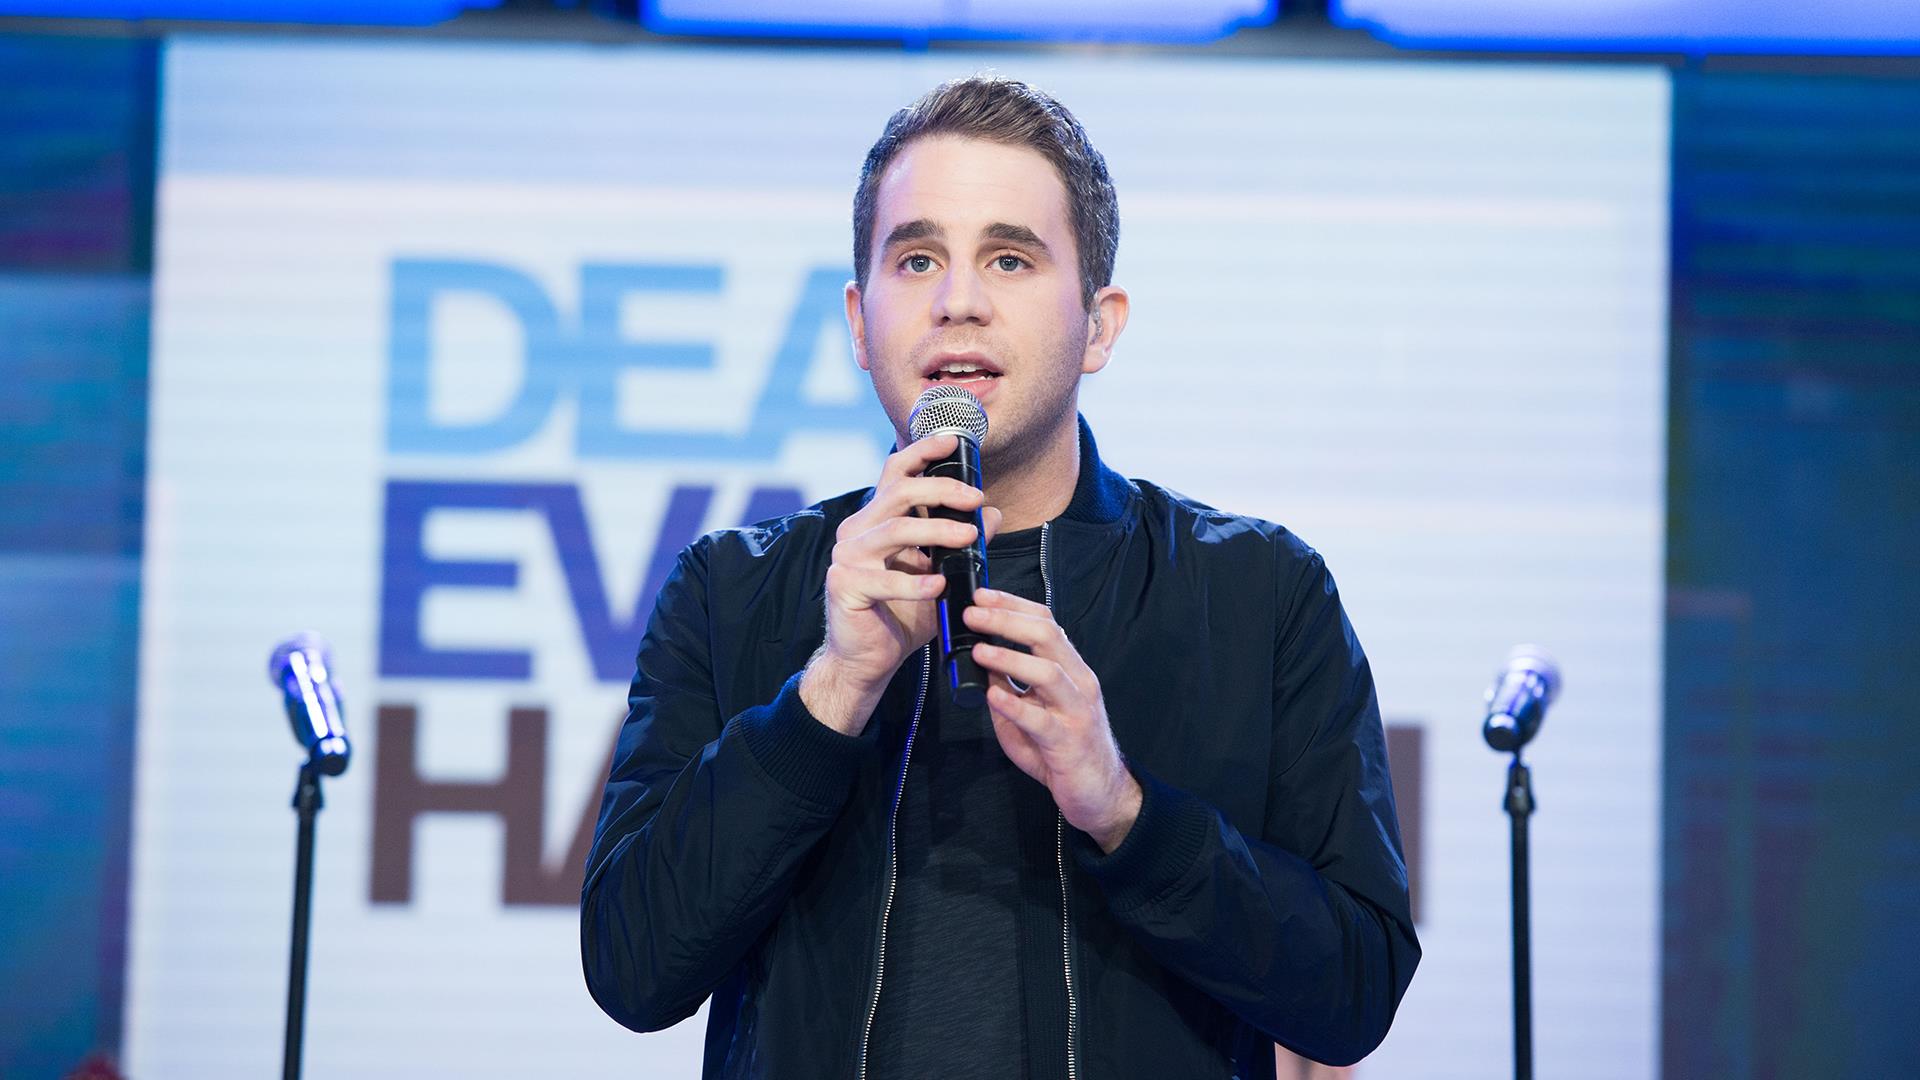 Watch stars of Broadway musical ‘Dear Evan Hansen’ perform live on TODAY - TODAY.com1920 x 1080